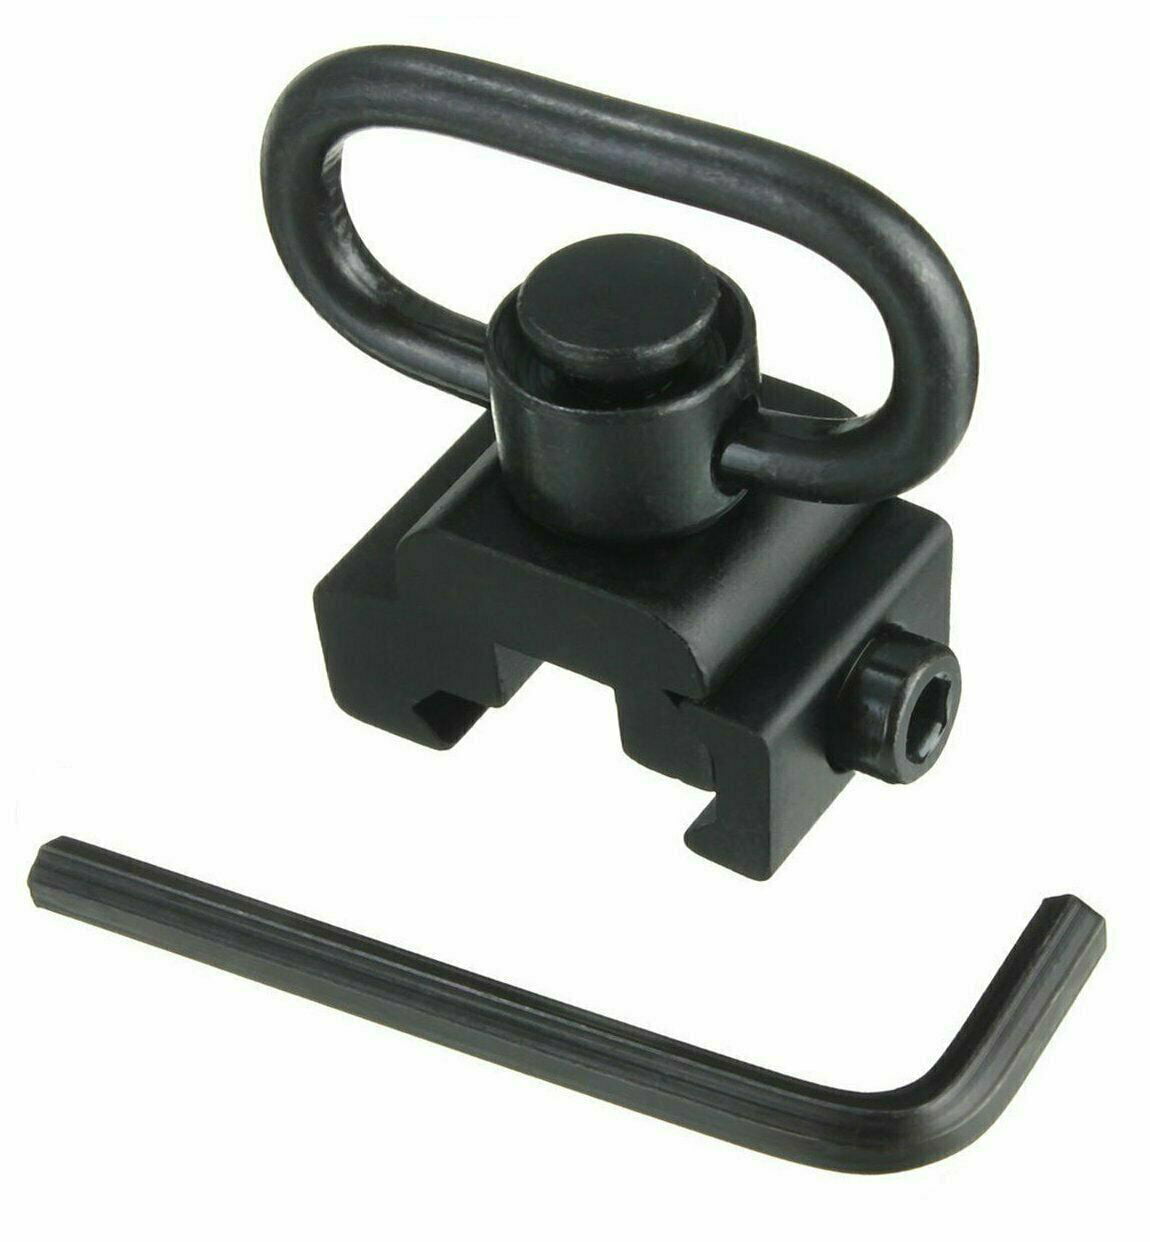 QD Sling Mount and Swivel with Release Button for Picatinny Weaver Rail 